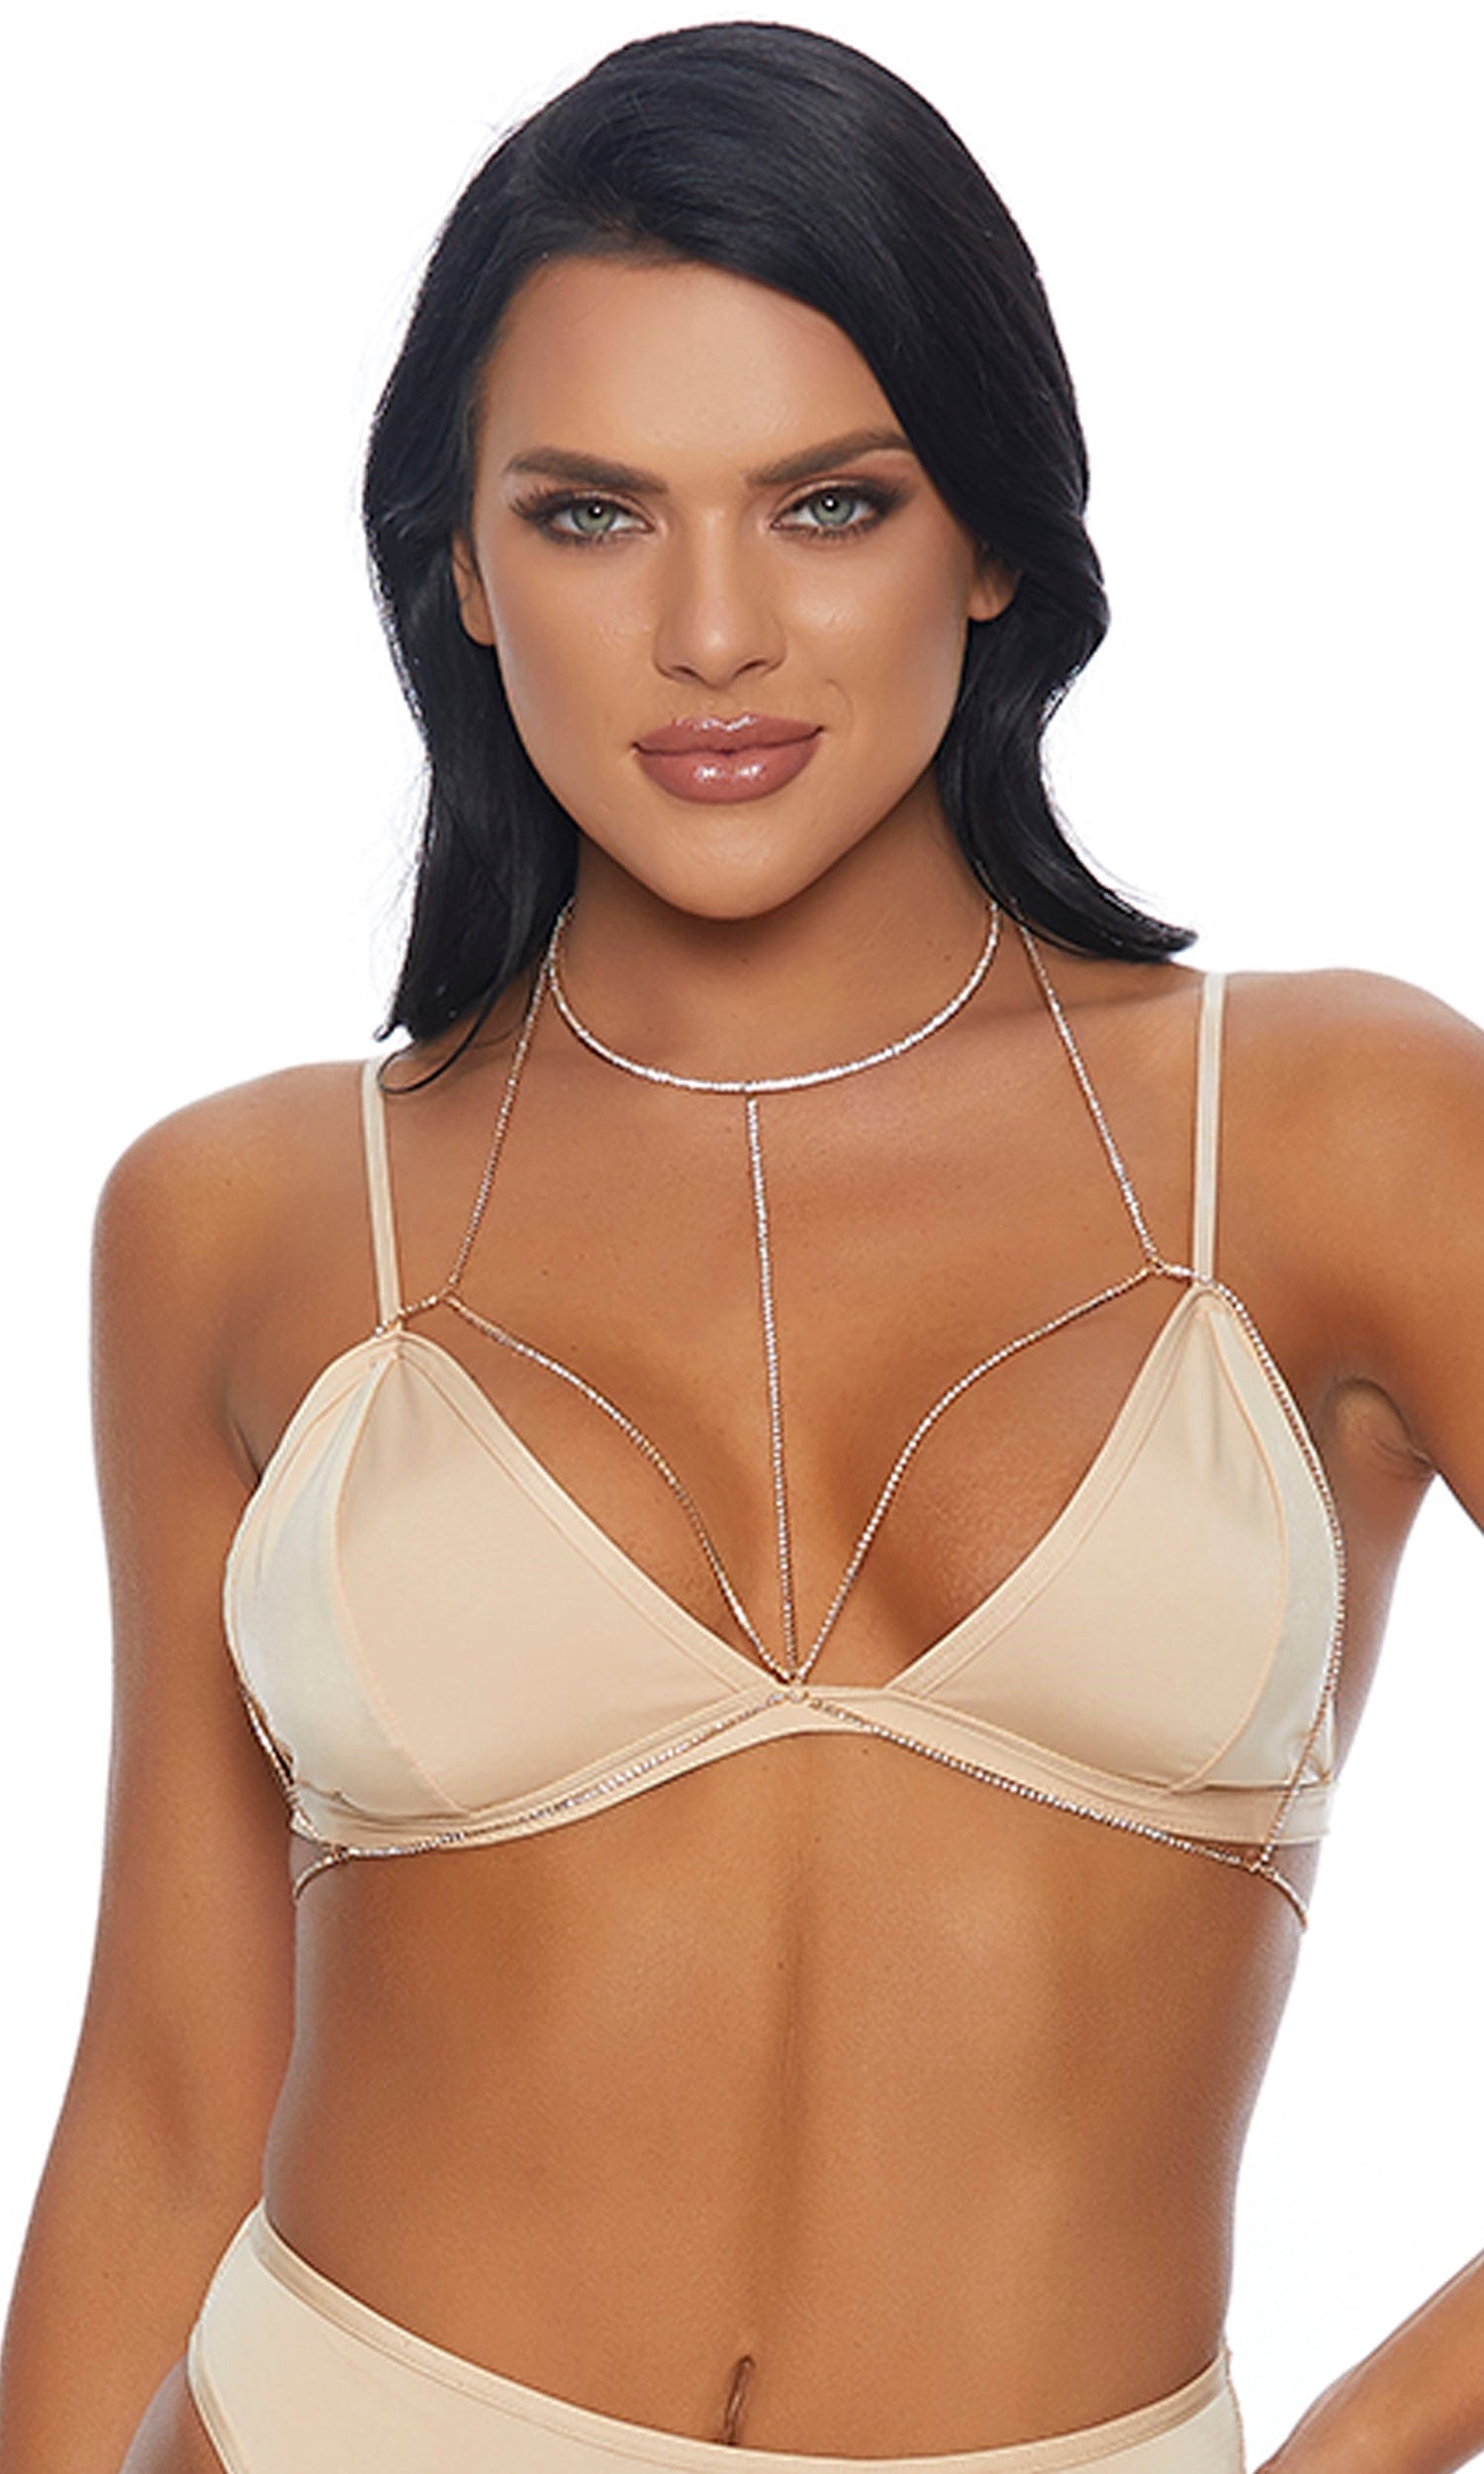 Forplay One Size / Gold Gold Diamonds Dancing Rhinestone Bra SHC-997988-O/S-FP 2022 Gold Diamonds Dancing Rhinestone Bra Forplay 997988 Apparel & Accessories > Clothing > Underwear & Socks > Lingerie